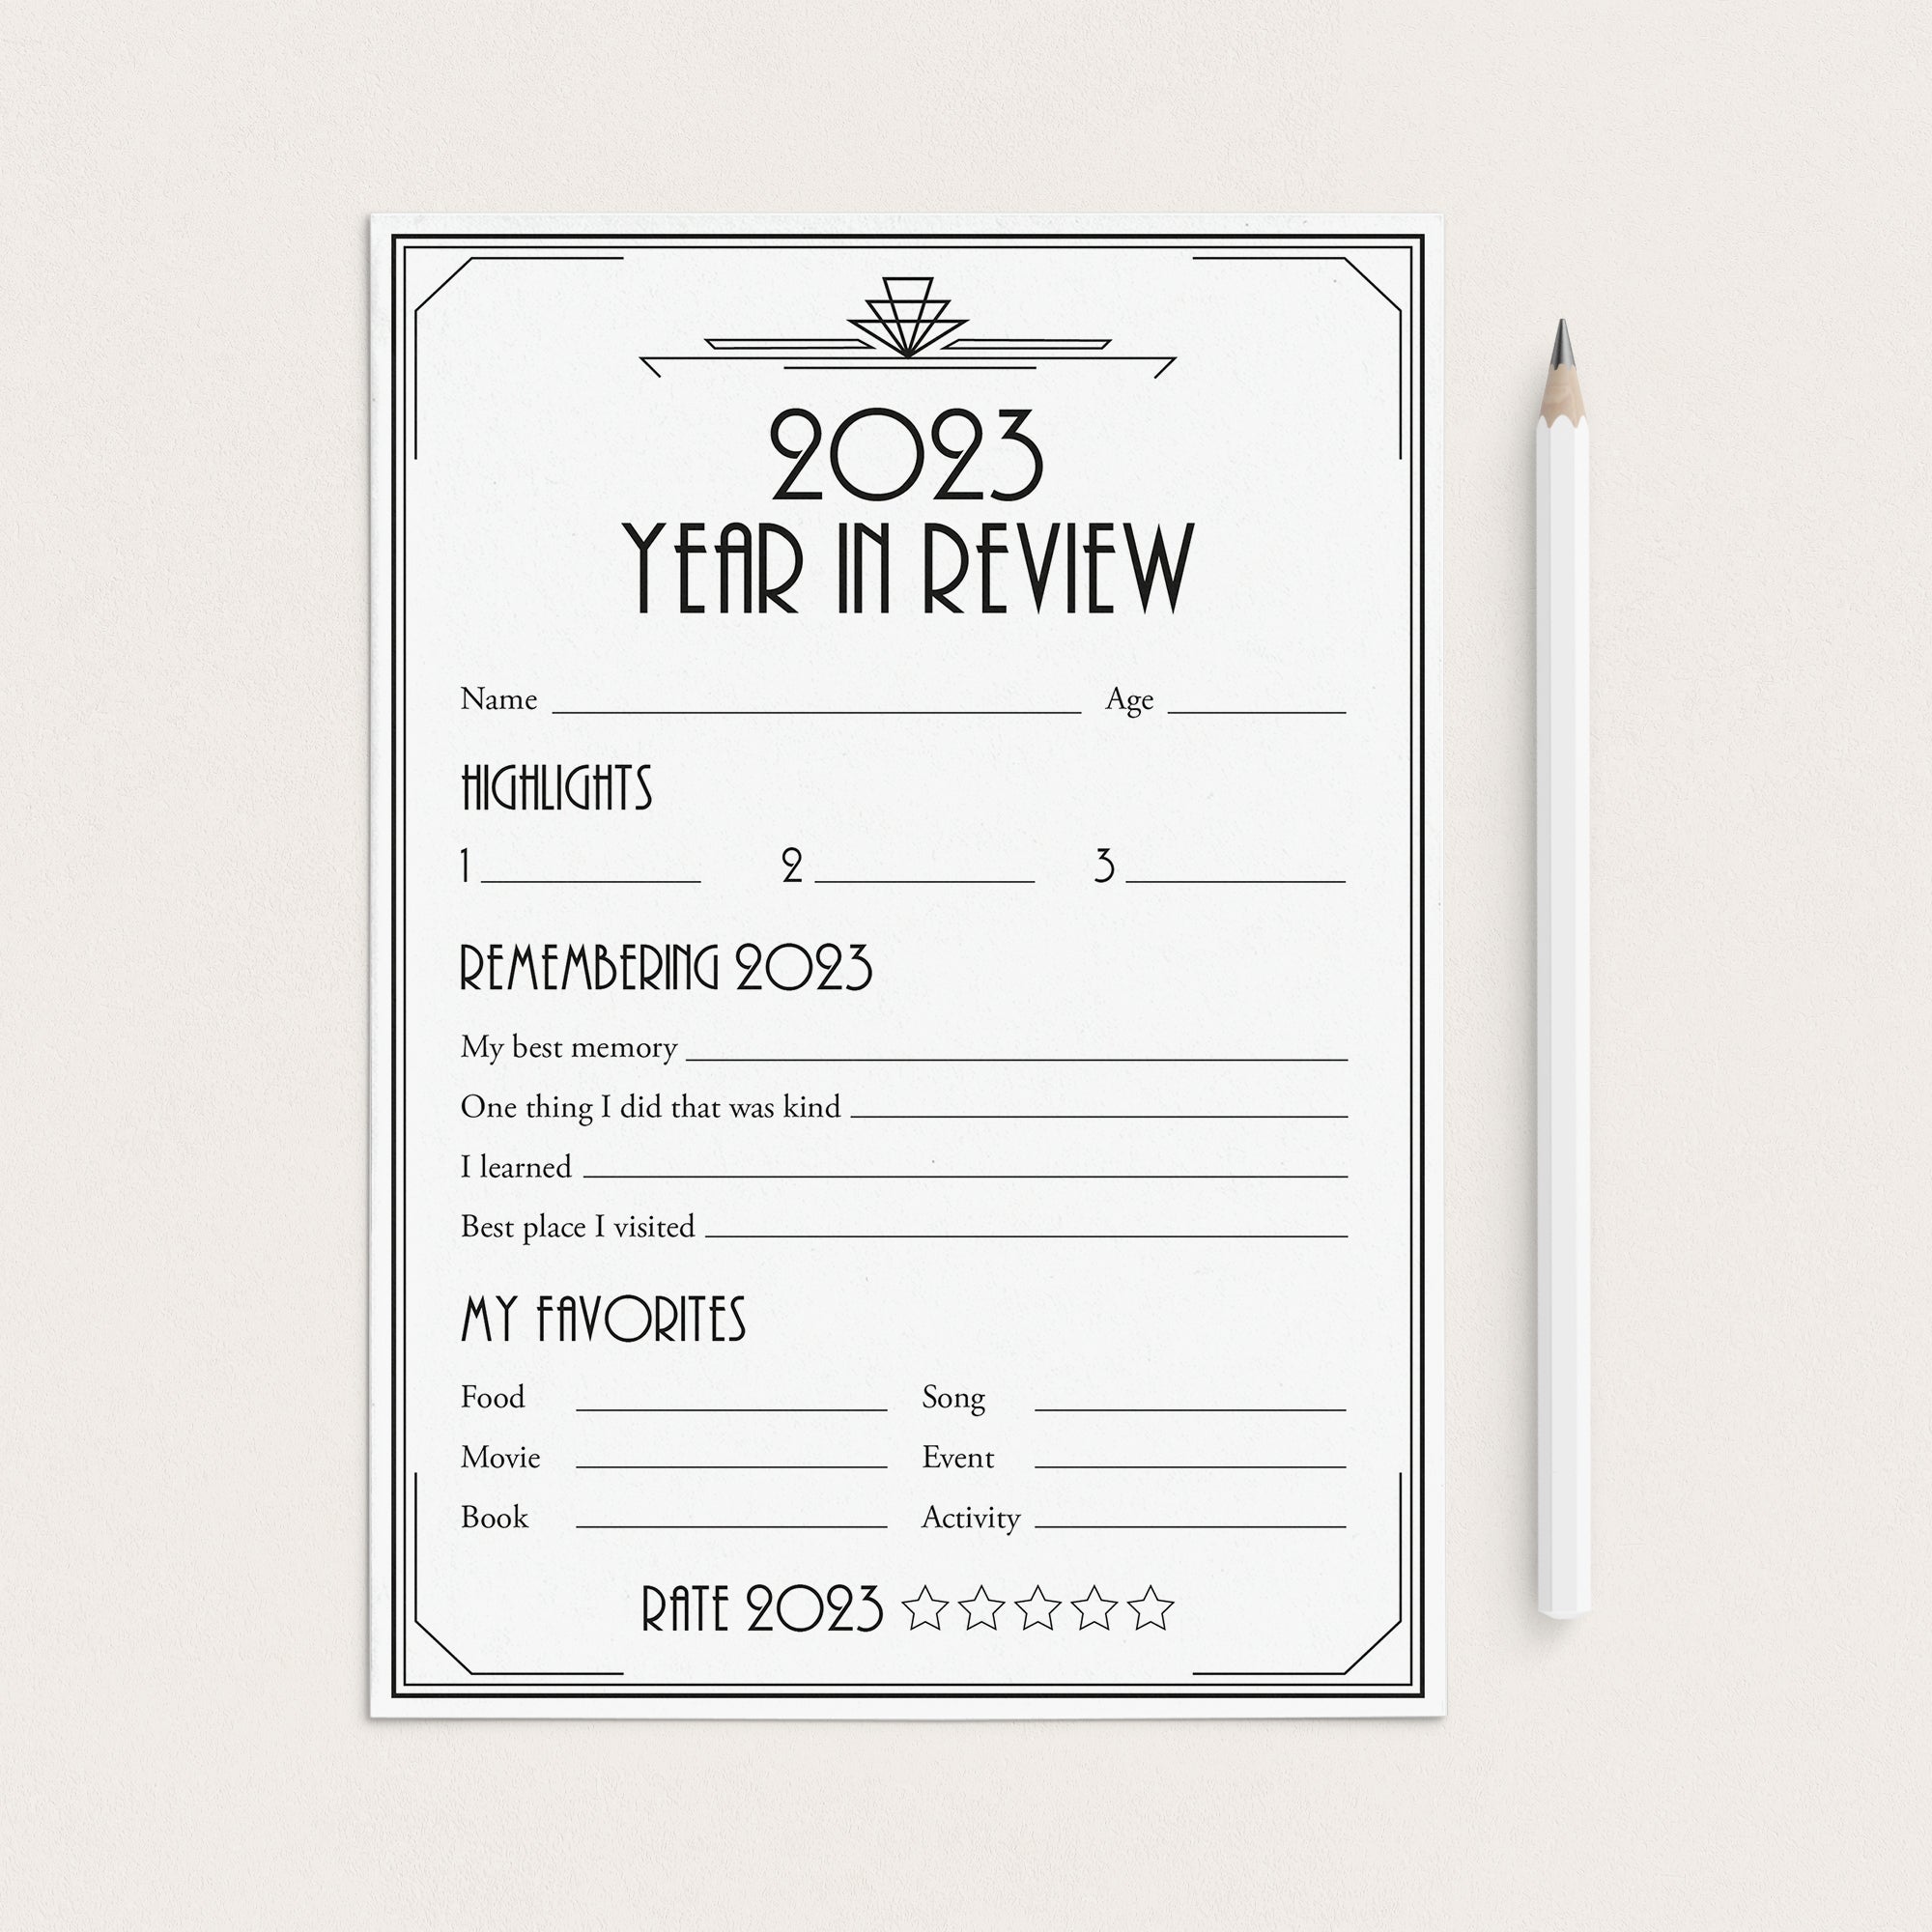 2023 Year in Review Cards for Gatbsy New Years Party by LittleSizzle